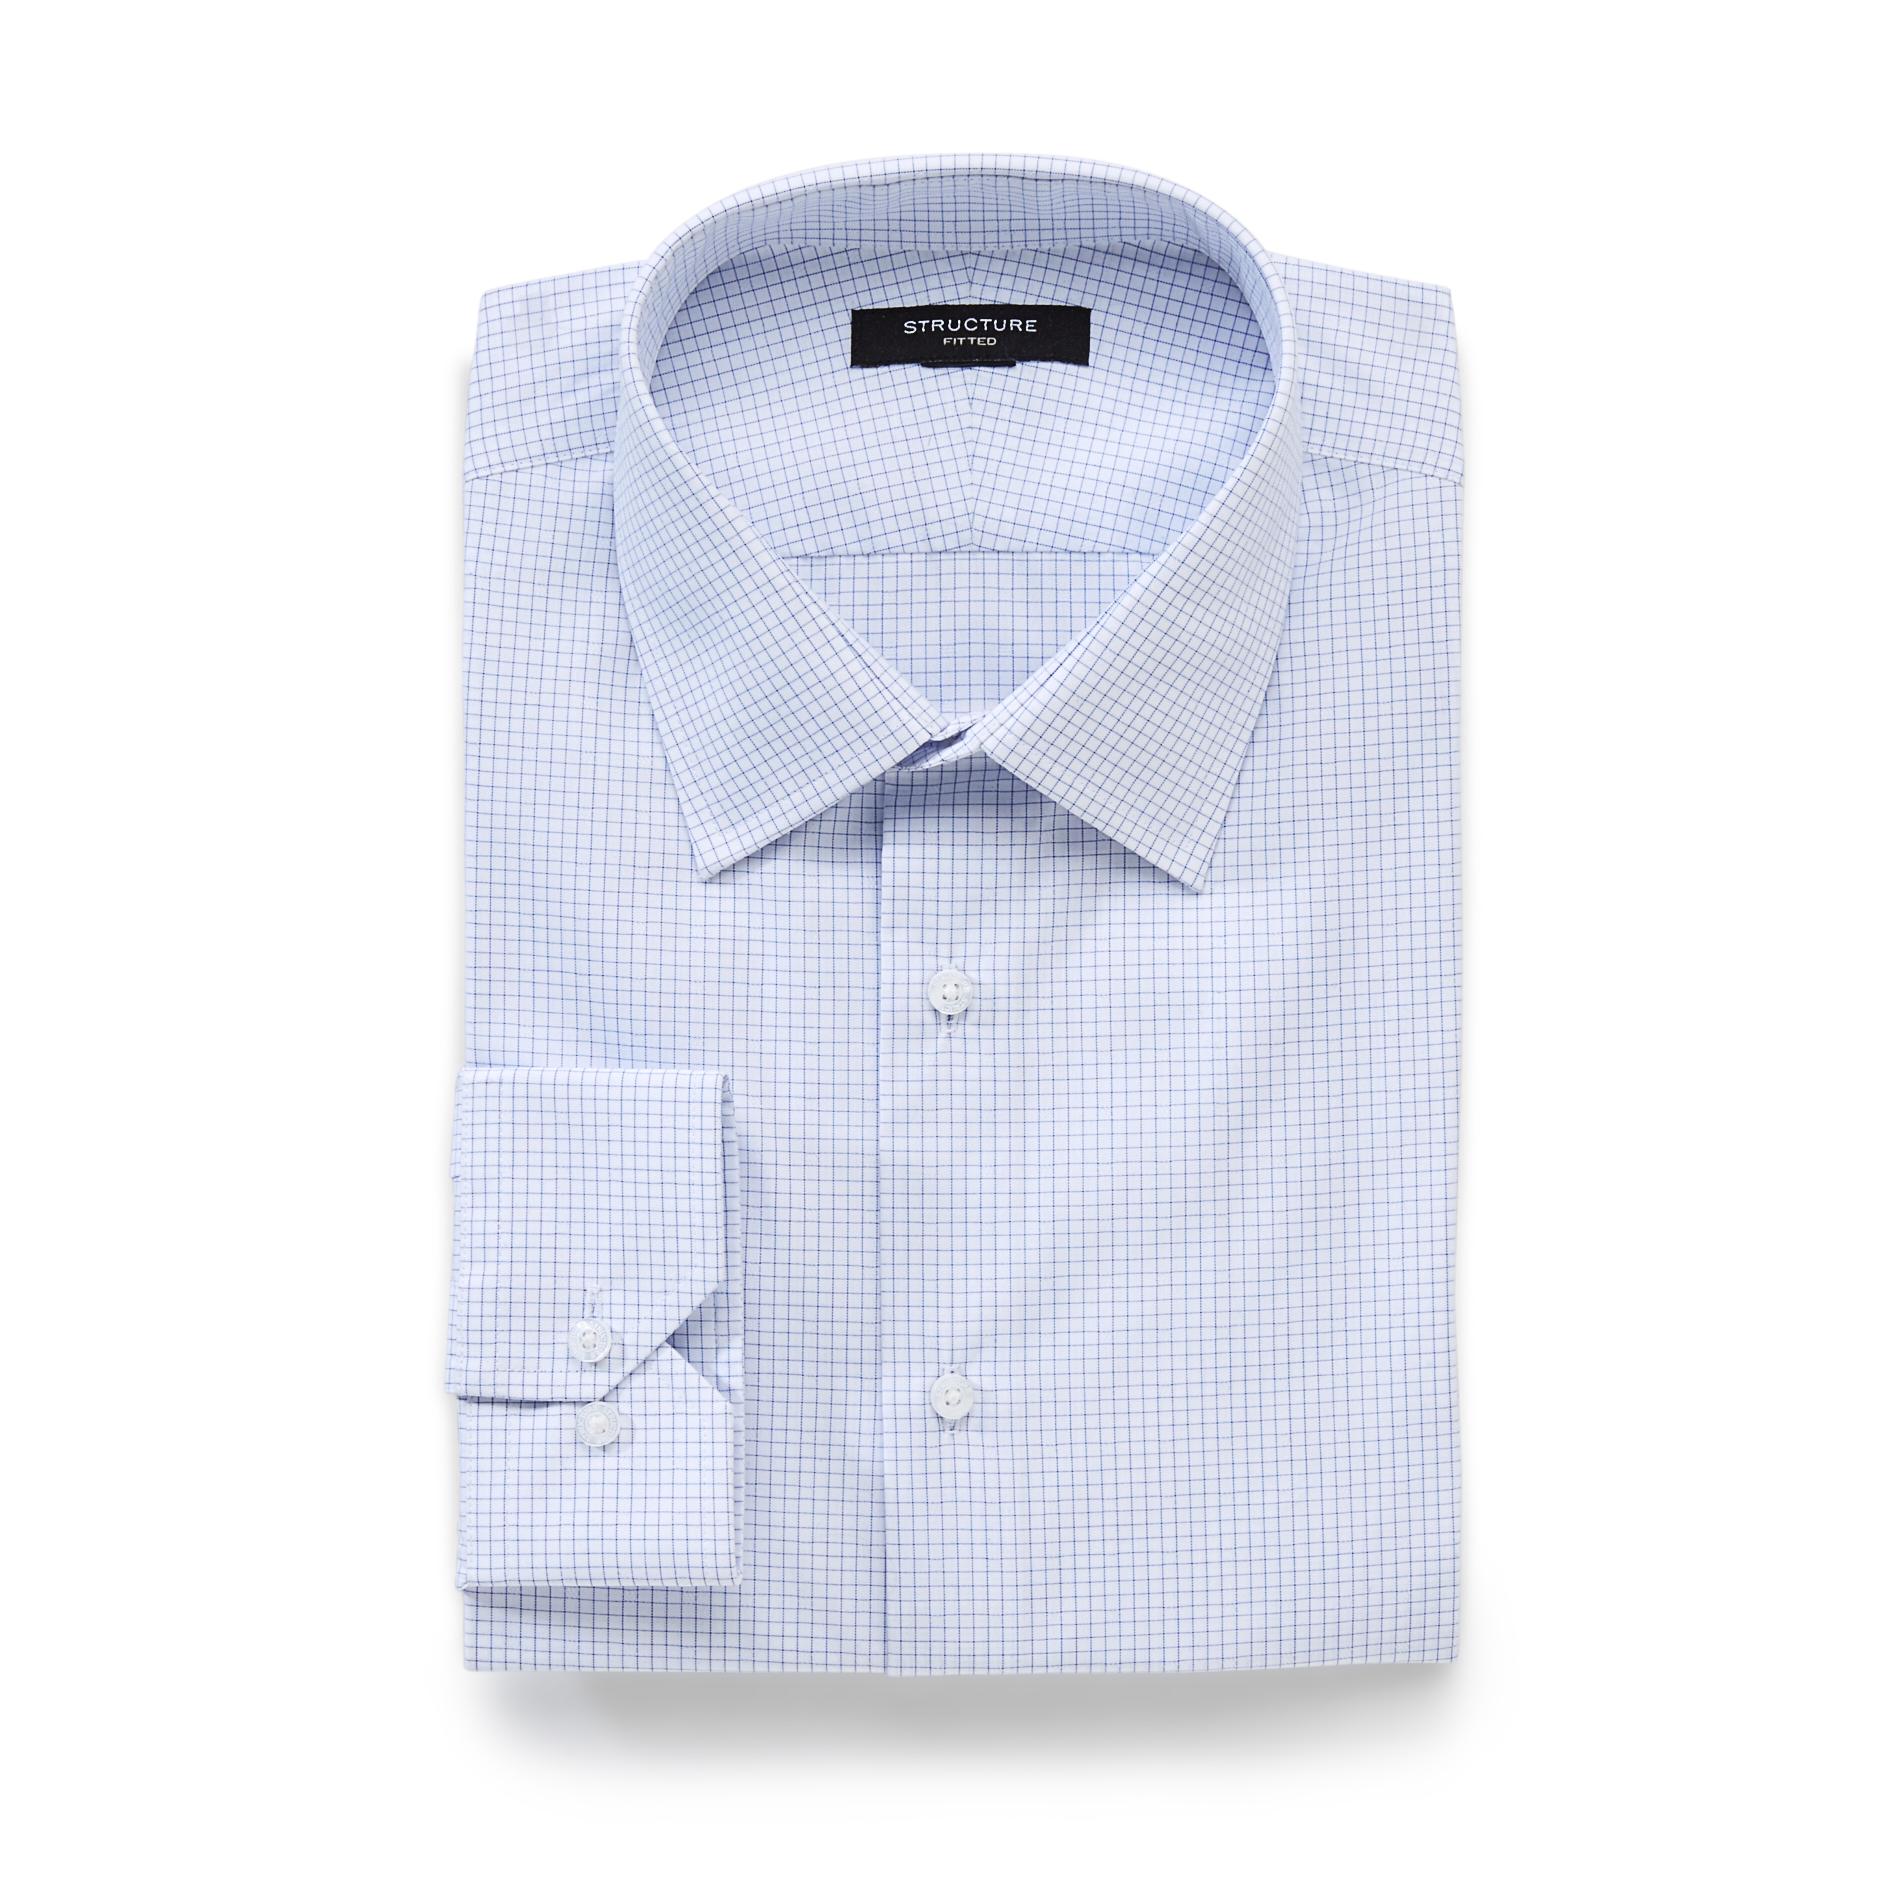 Structure Men's Fitted Dress Shirt - Dobby Stripe